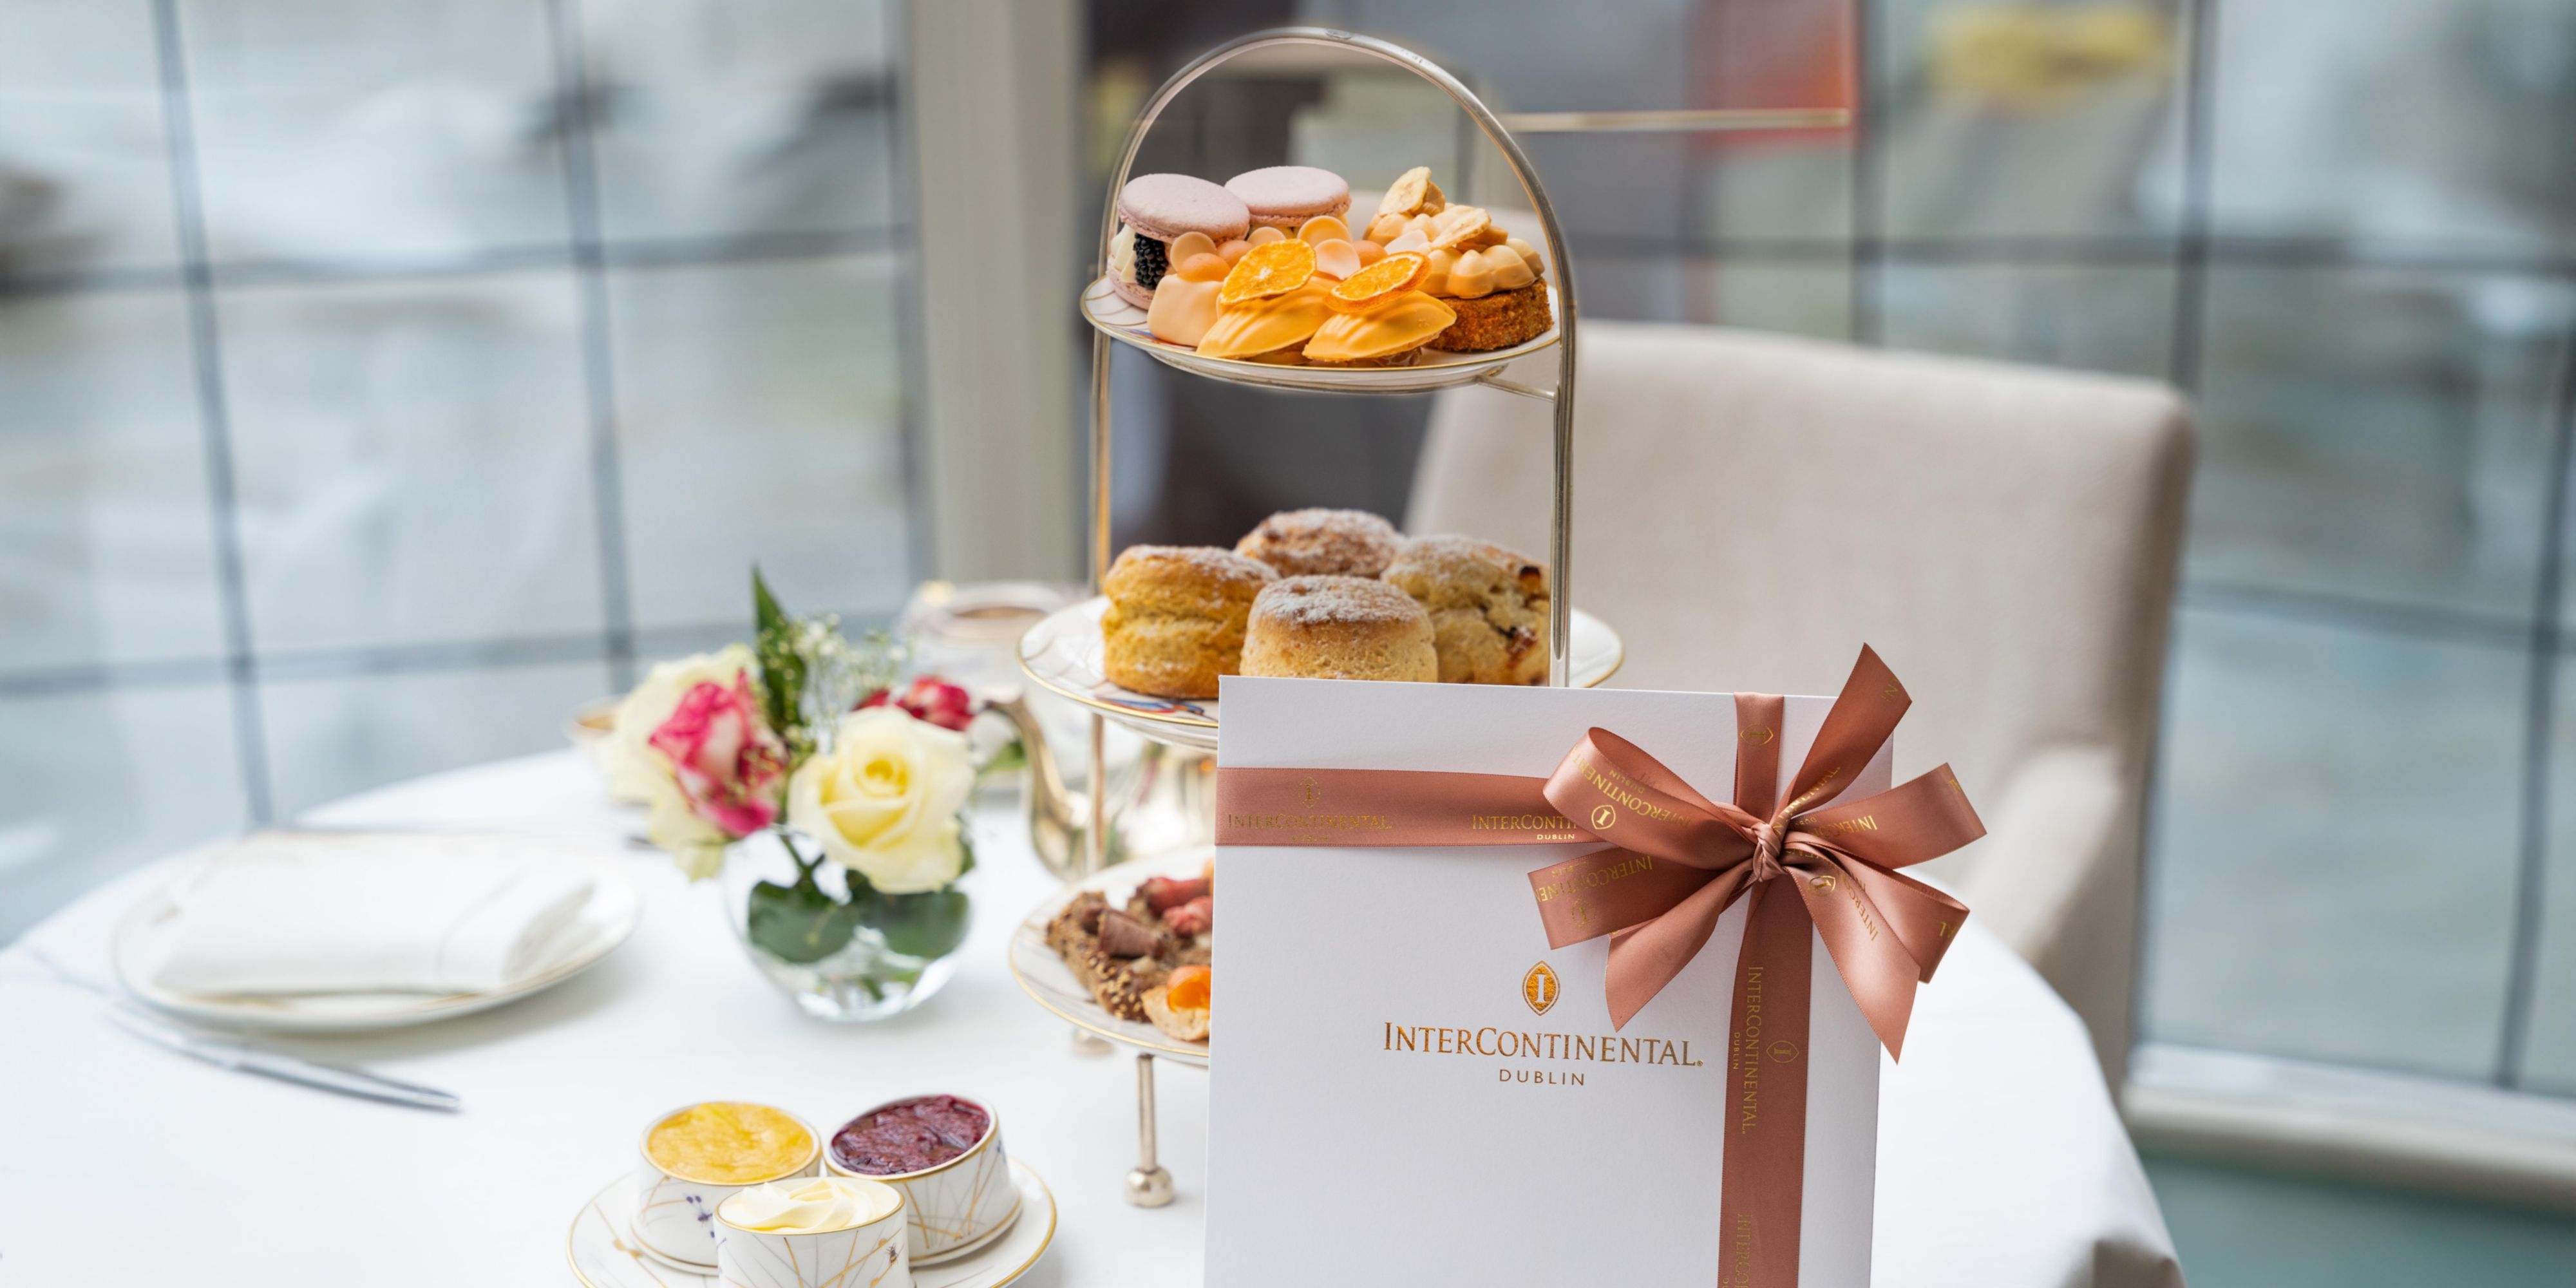 Gift an indulgent experience at InterContinental Dublin with a luxurious gift voucher. Say thank you or show your appreciation with a delightful Afternoon Tea in The Lobby Lounge, bestow a five-star overnight stay or allow them to choose their own treat with a monetary gift voucher.